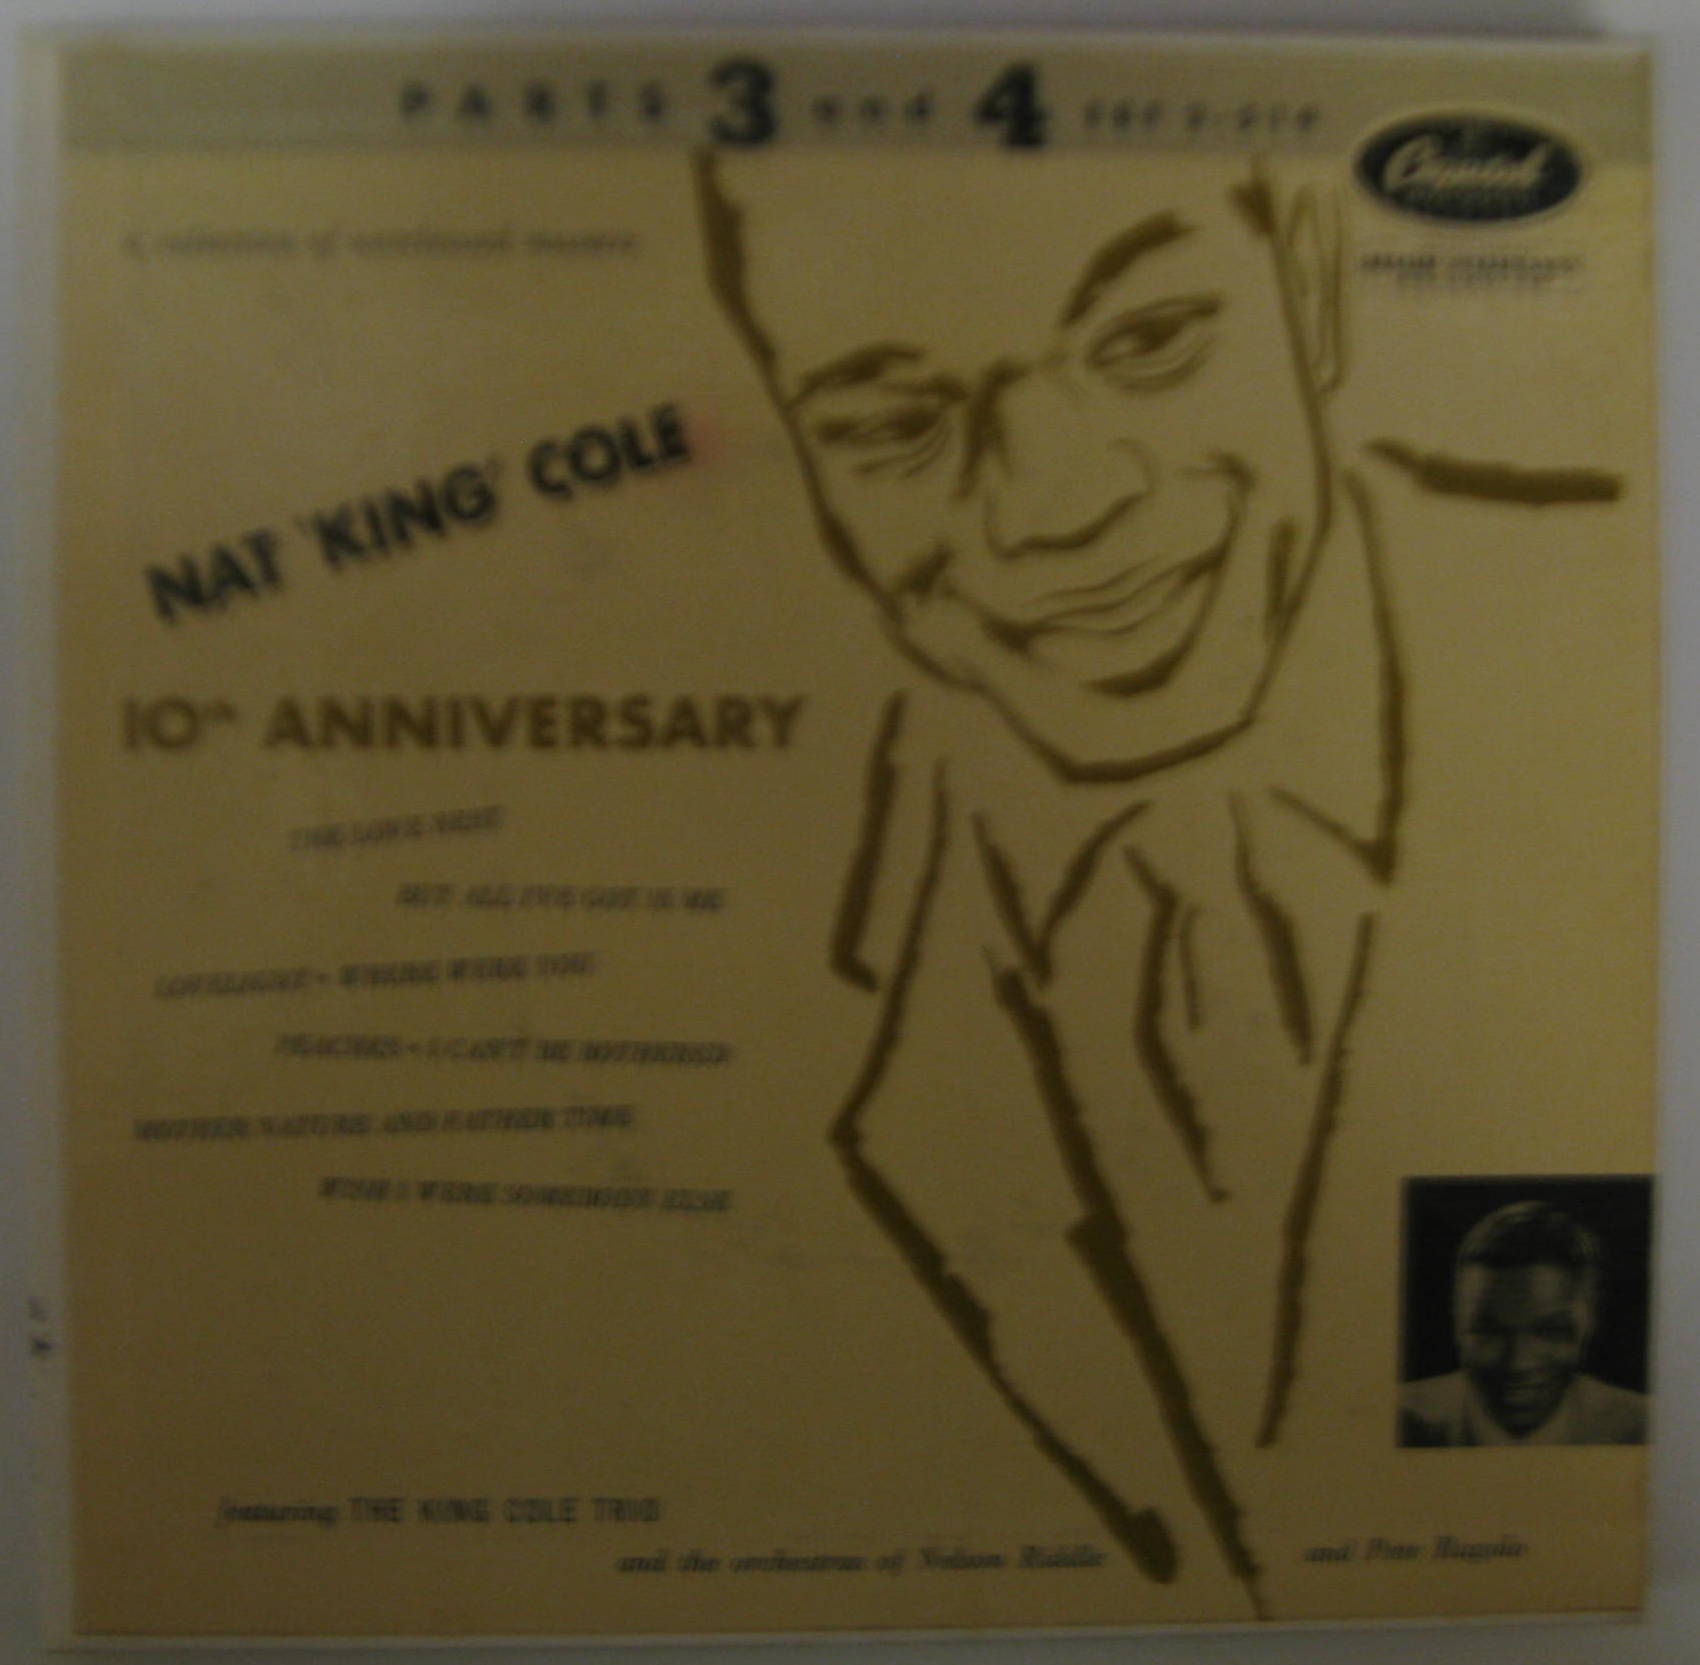 Nat King Cole / 10th Anniversary Parts 3 And 4 EP